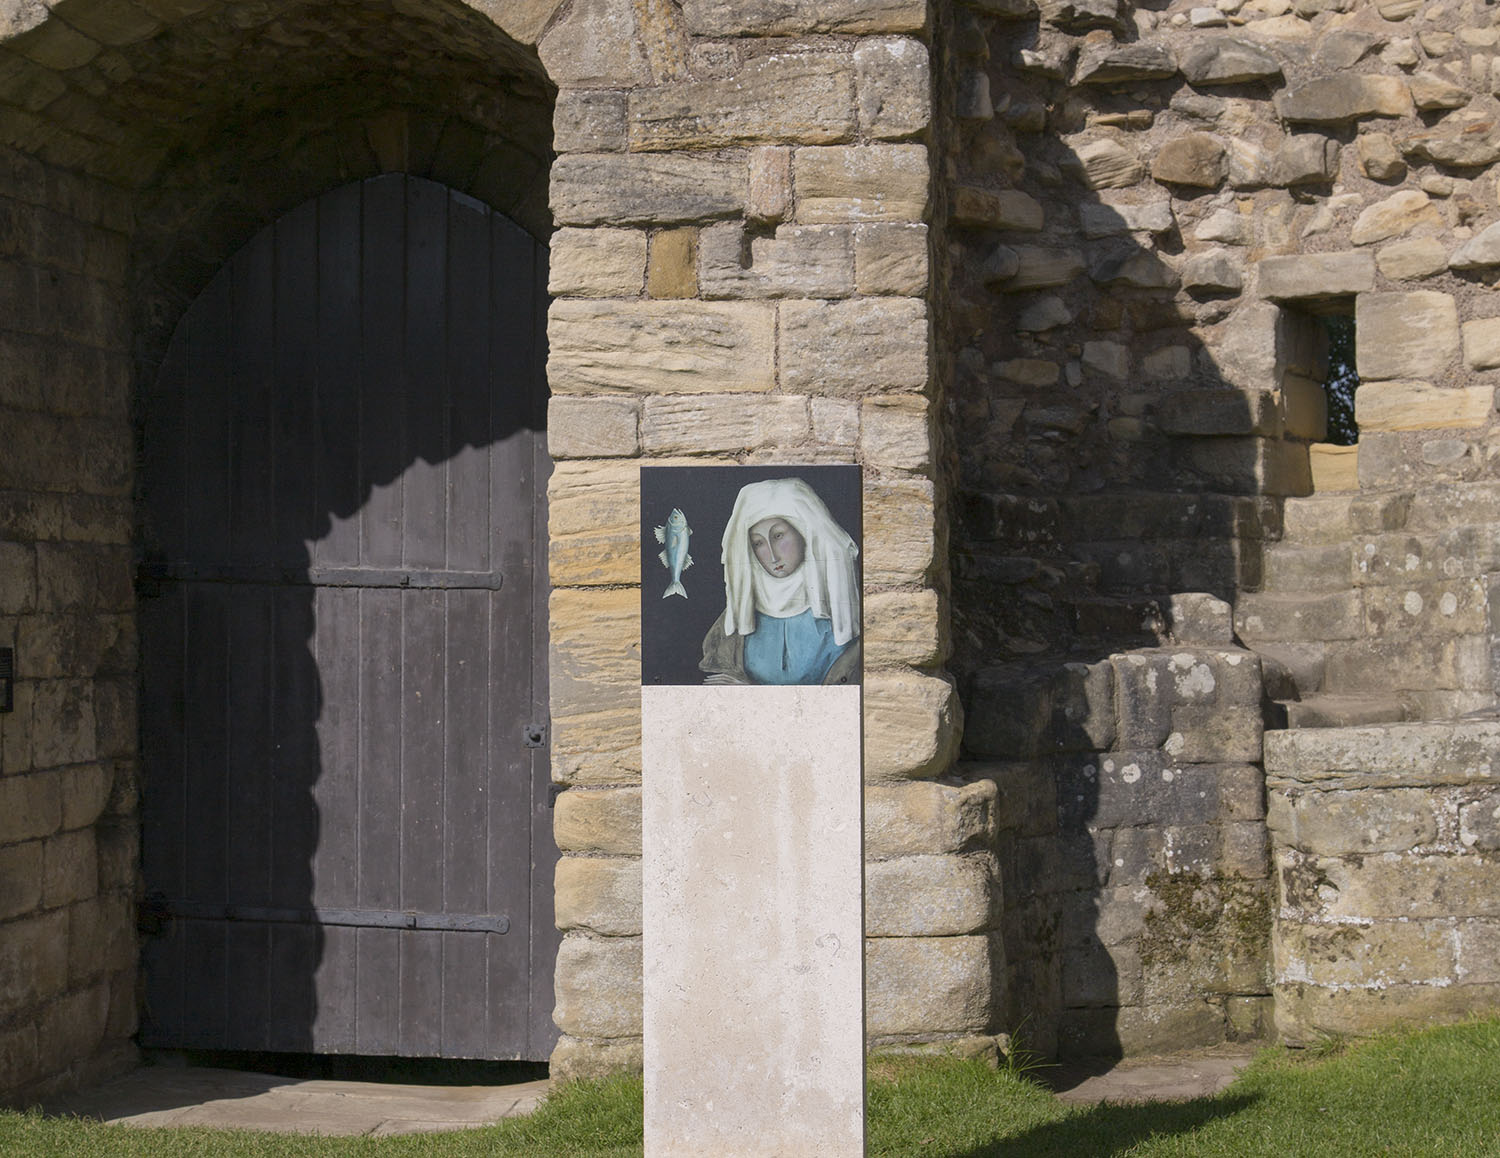 One of the character nodes depicting Widow Nawton at Warkworth Castle.